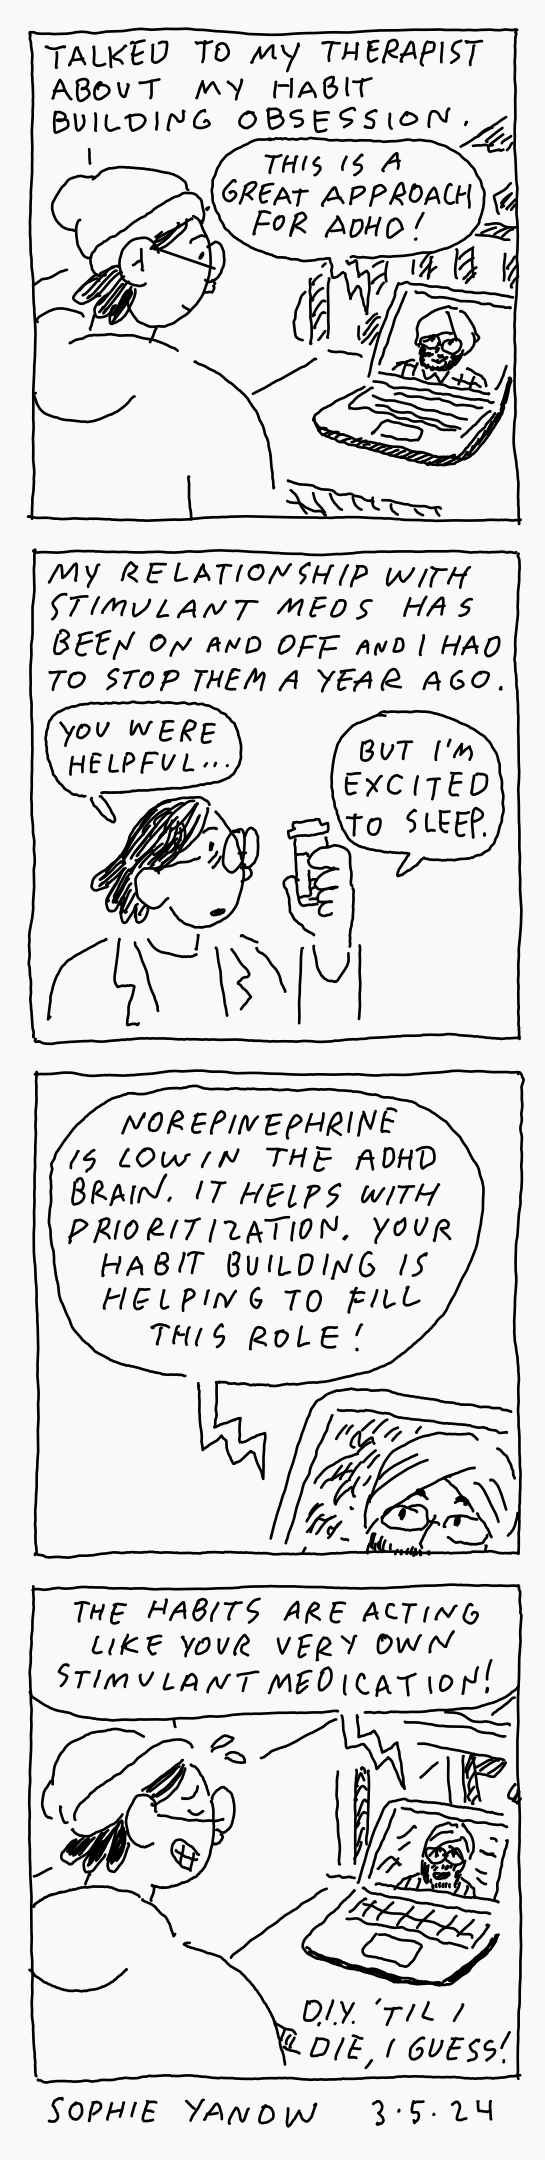 A comic about ADHD and habits.